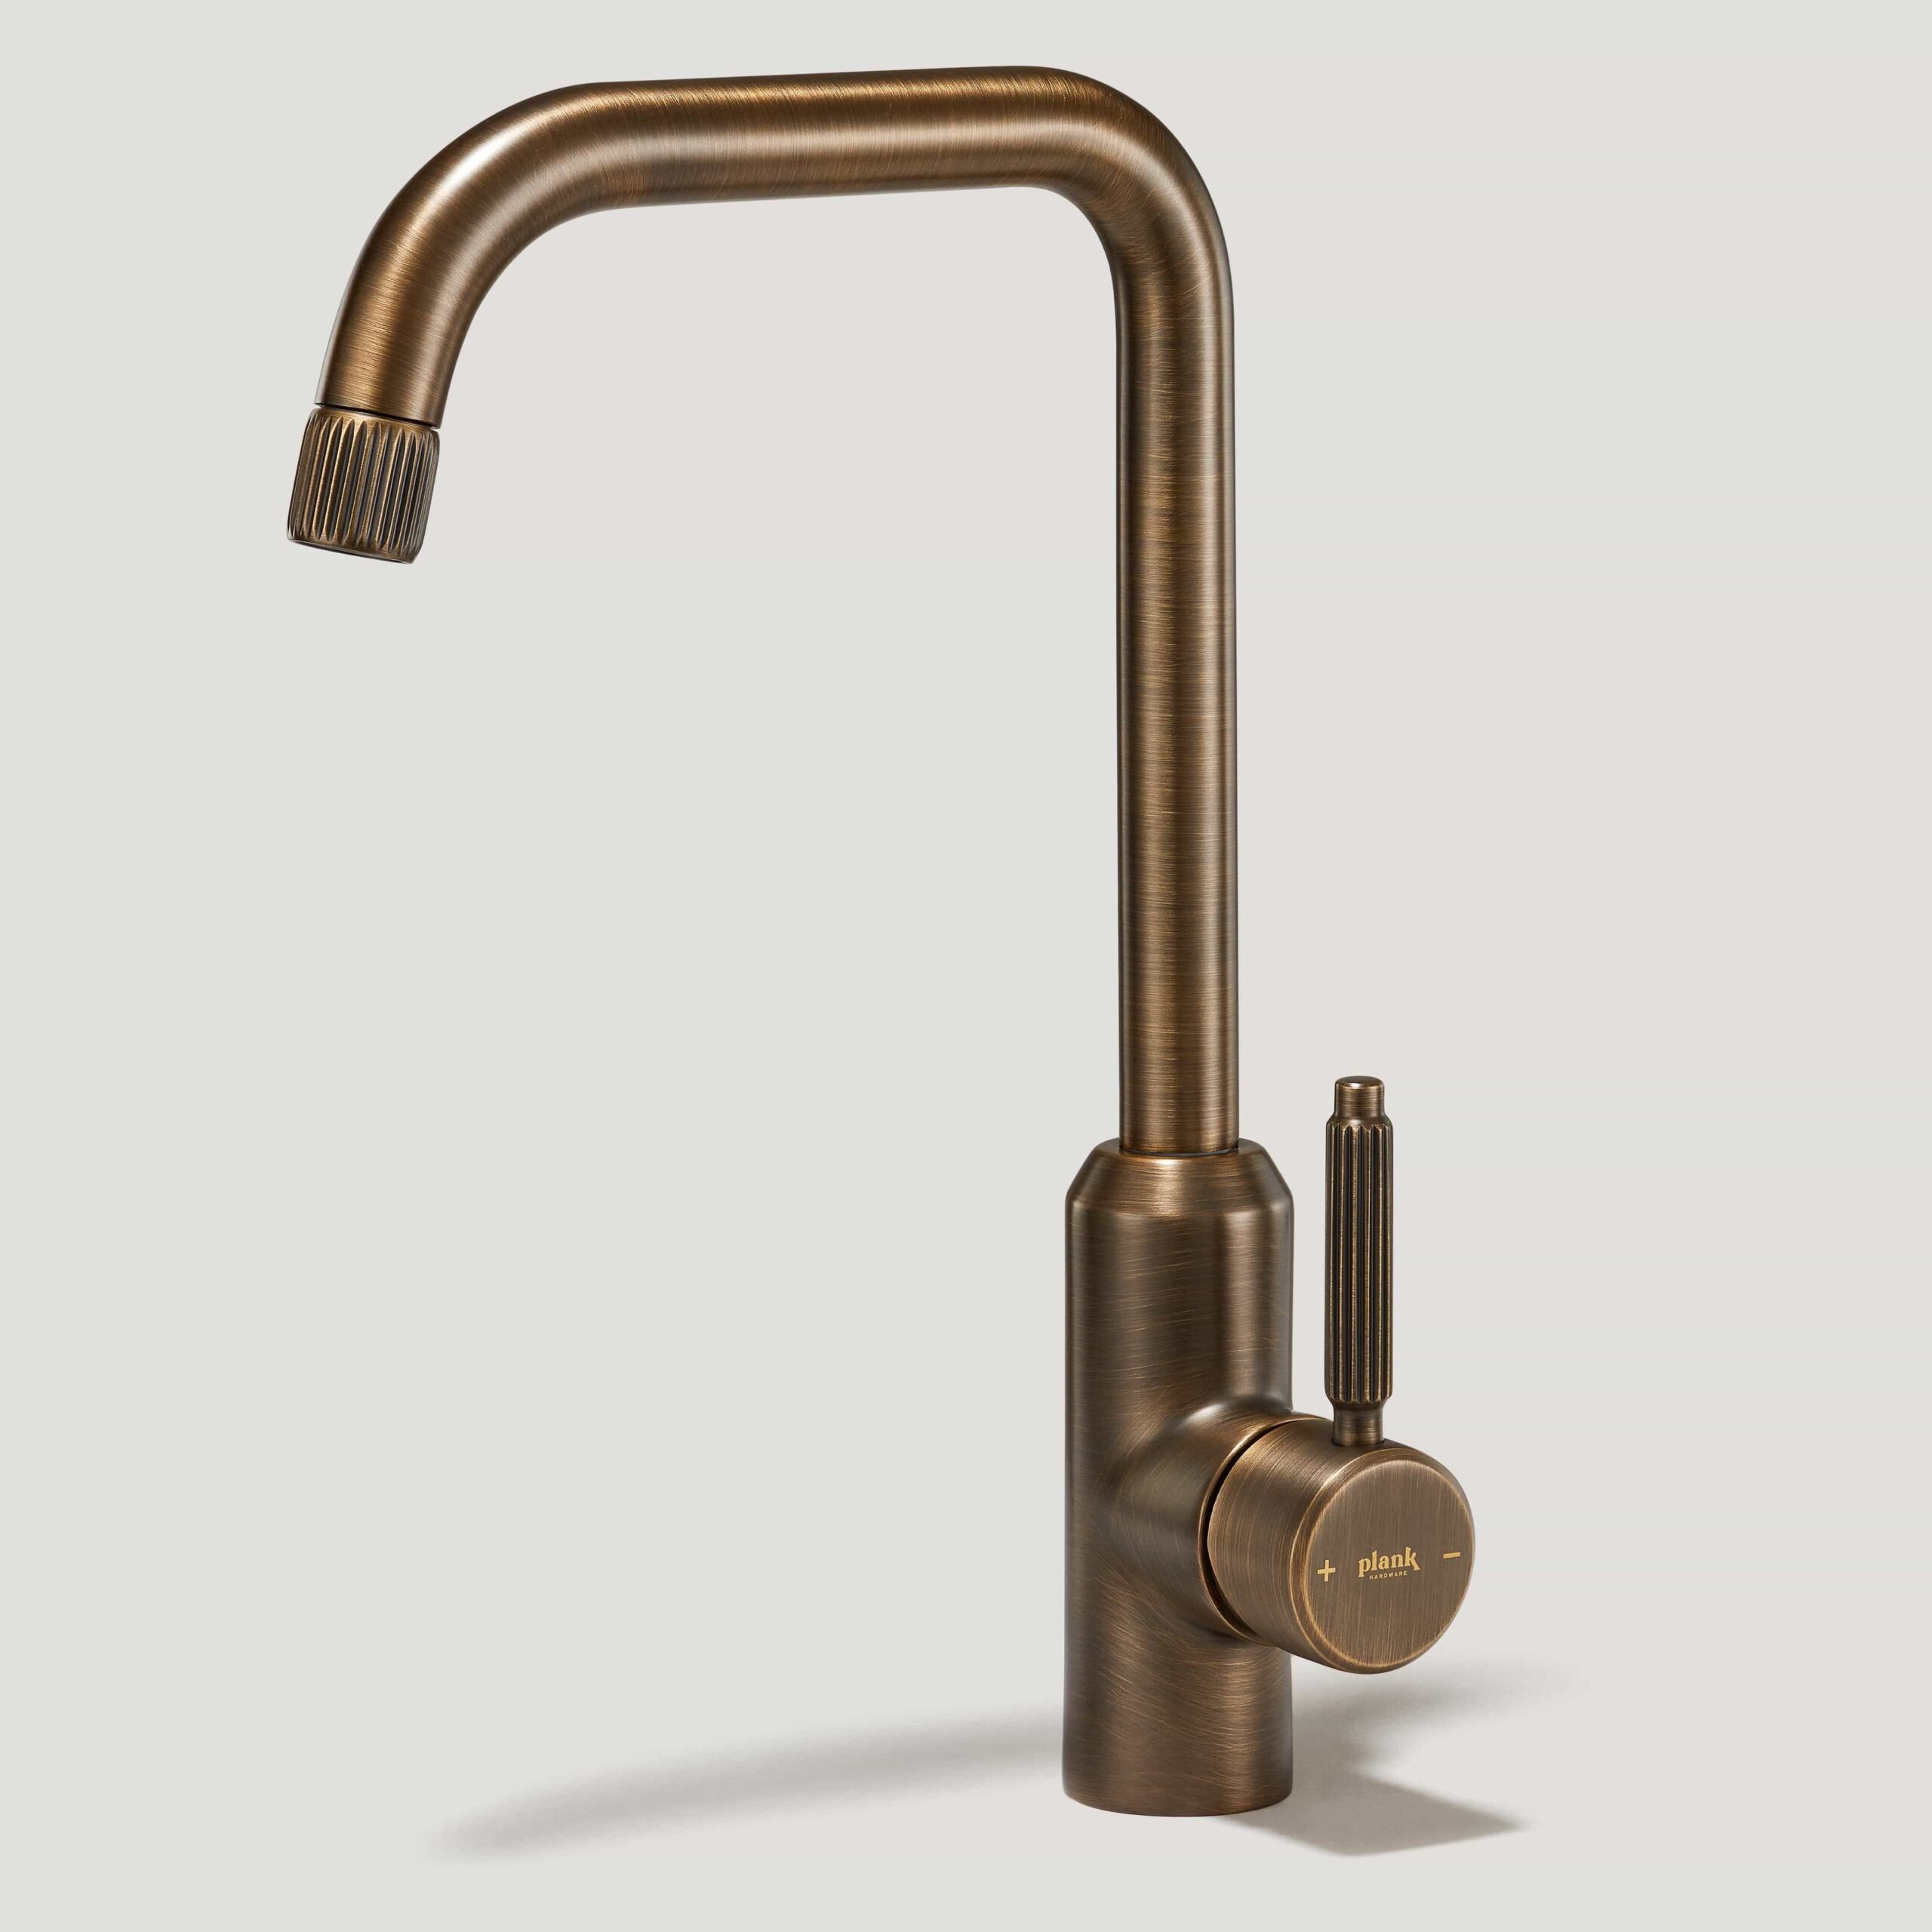 Mixer Tap Designs: Sleek and Functional Fixtures for Your Kitchen